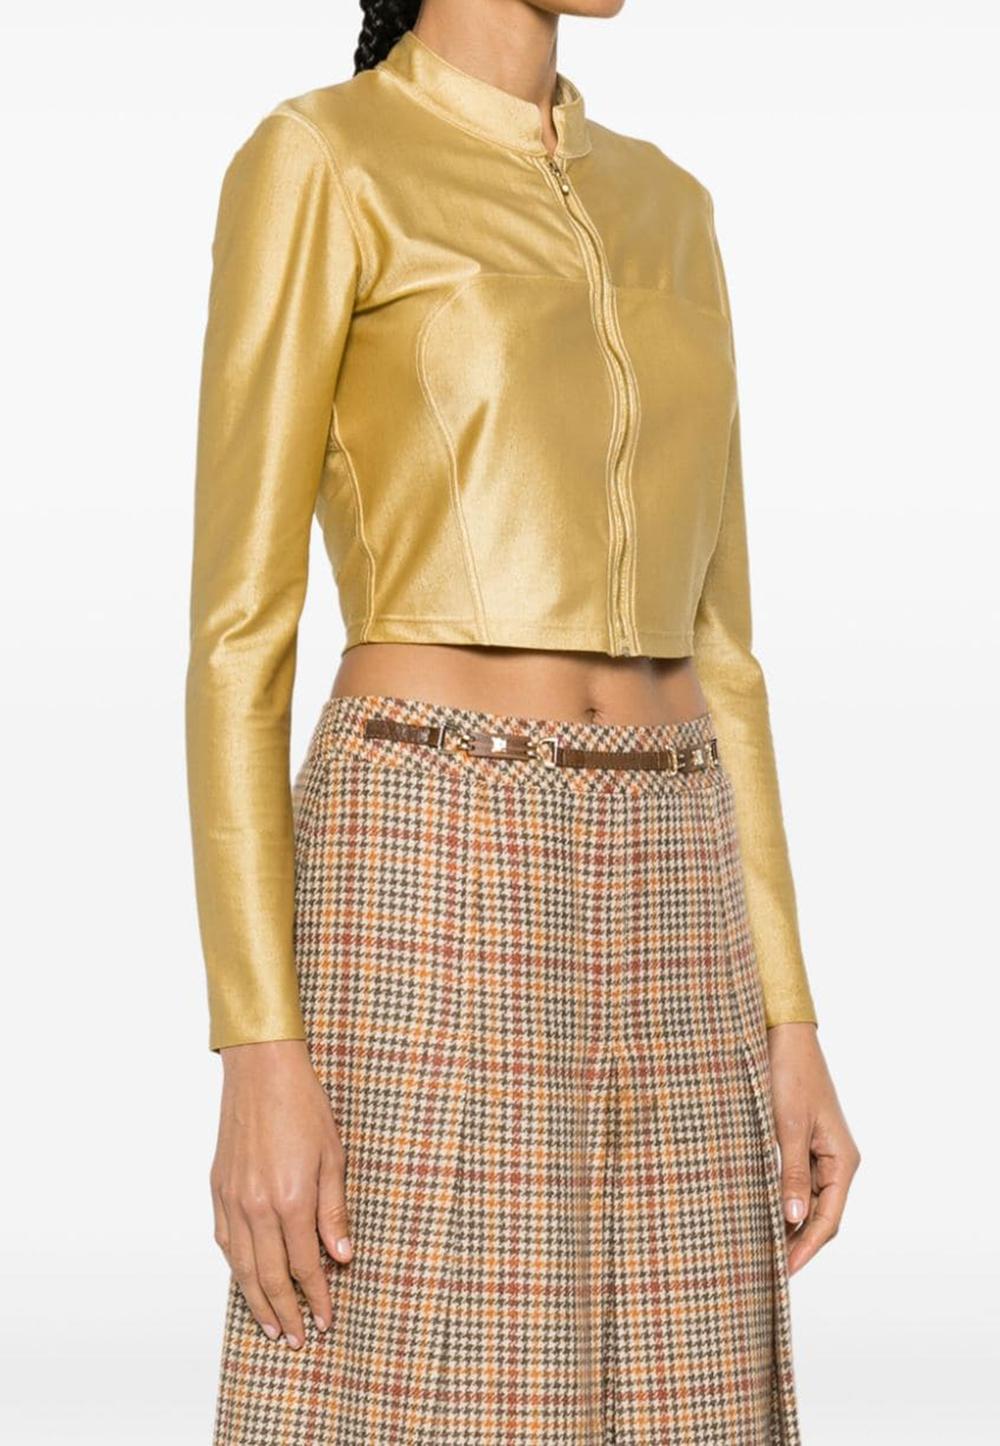 Women's  Chanel Gold-Tone Metallic Cropped Jacket For Sale